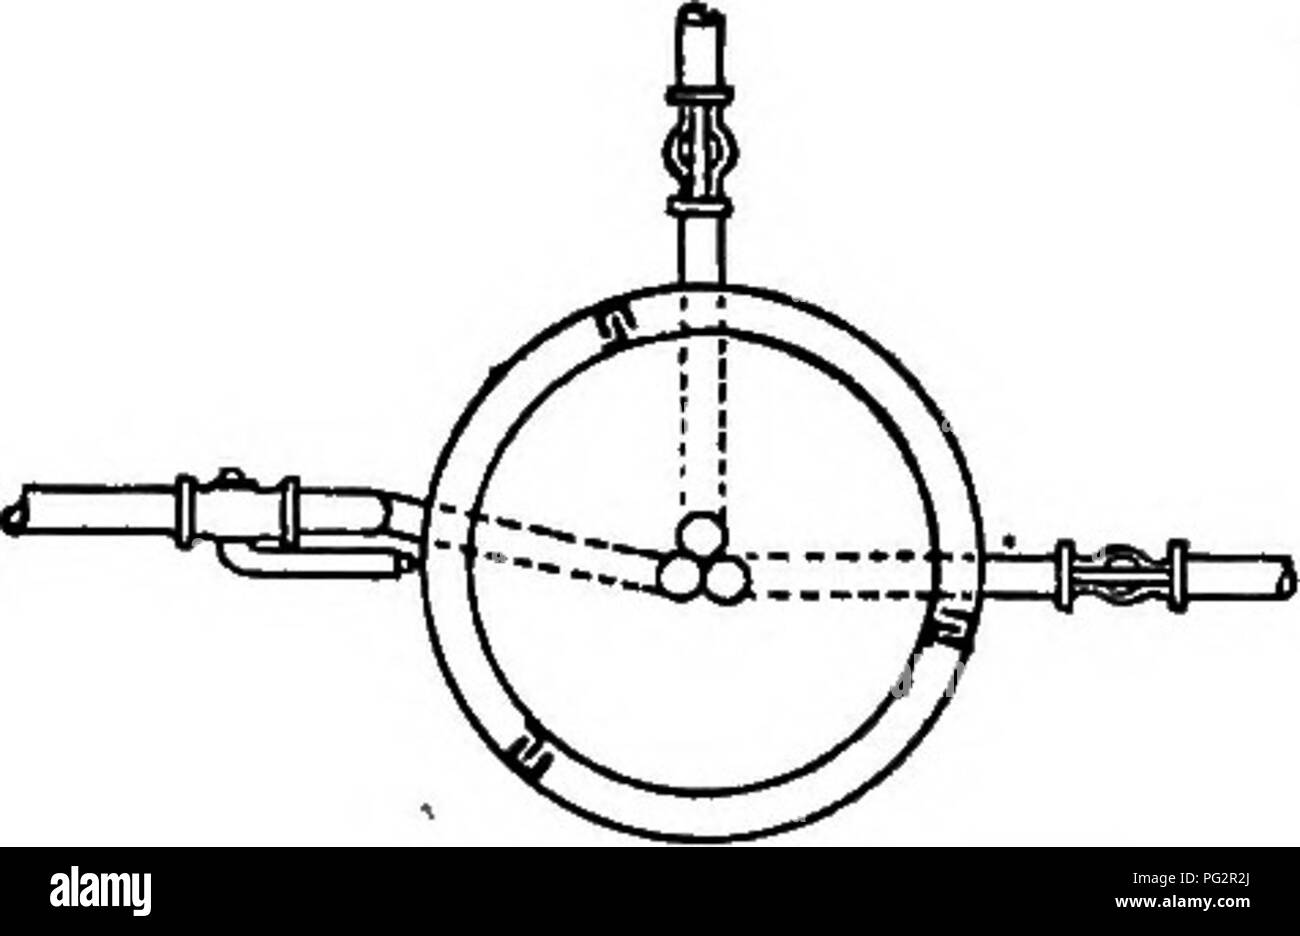 . Laboratory work in bacteriology. Bacteriology. fi^ A^- rOP OF /IVKSIf CPOSZ-SSCrioN. Fig. 38. Murrill's gas-pressure regulator. U tube containing water. The cylinder may be floated in water, but, inasmuch as this is liable to evaporate, it is better to use liquid paraffin. The apparatus is provided with two outflow tubes, which are to be connected with thermo-regulators. It is of convenient size, being only 6 1 Journ. of Applied Microscopy 1, p. 92, 1898. Centralblatt ffir Bakteriologie 23, p. 1056,1898.. Please note that these images are extracted from scanned page images that may have been Stock Photo